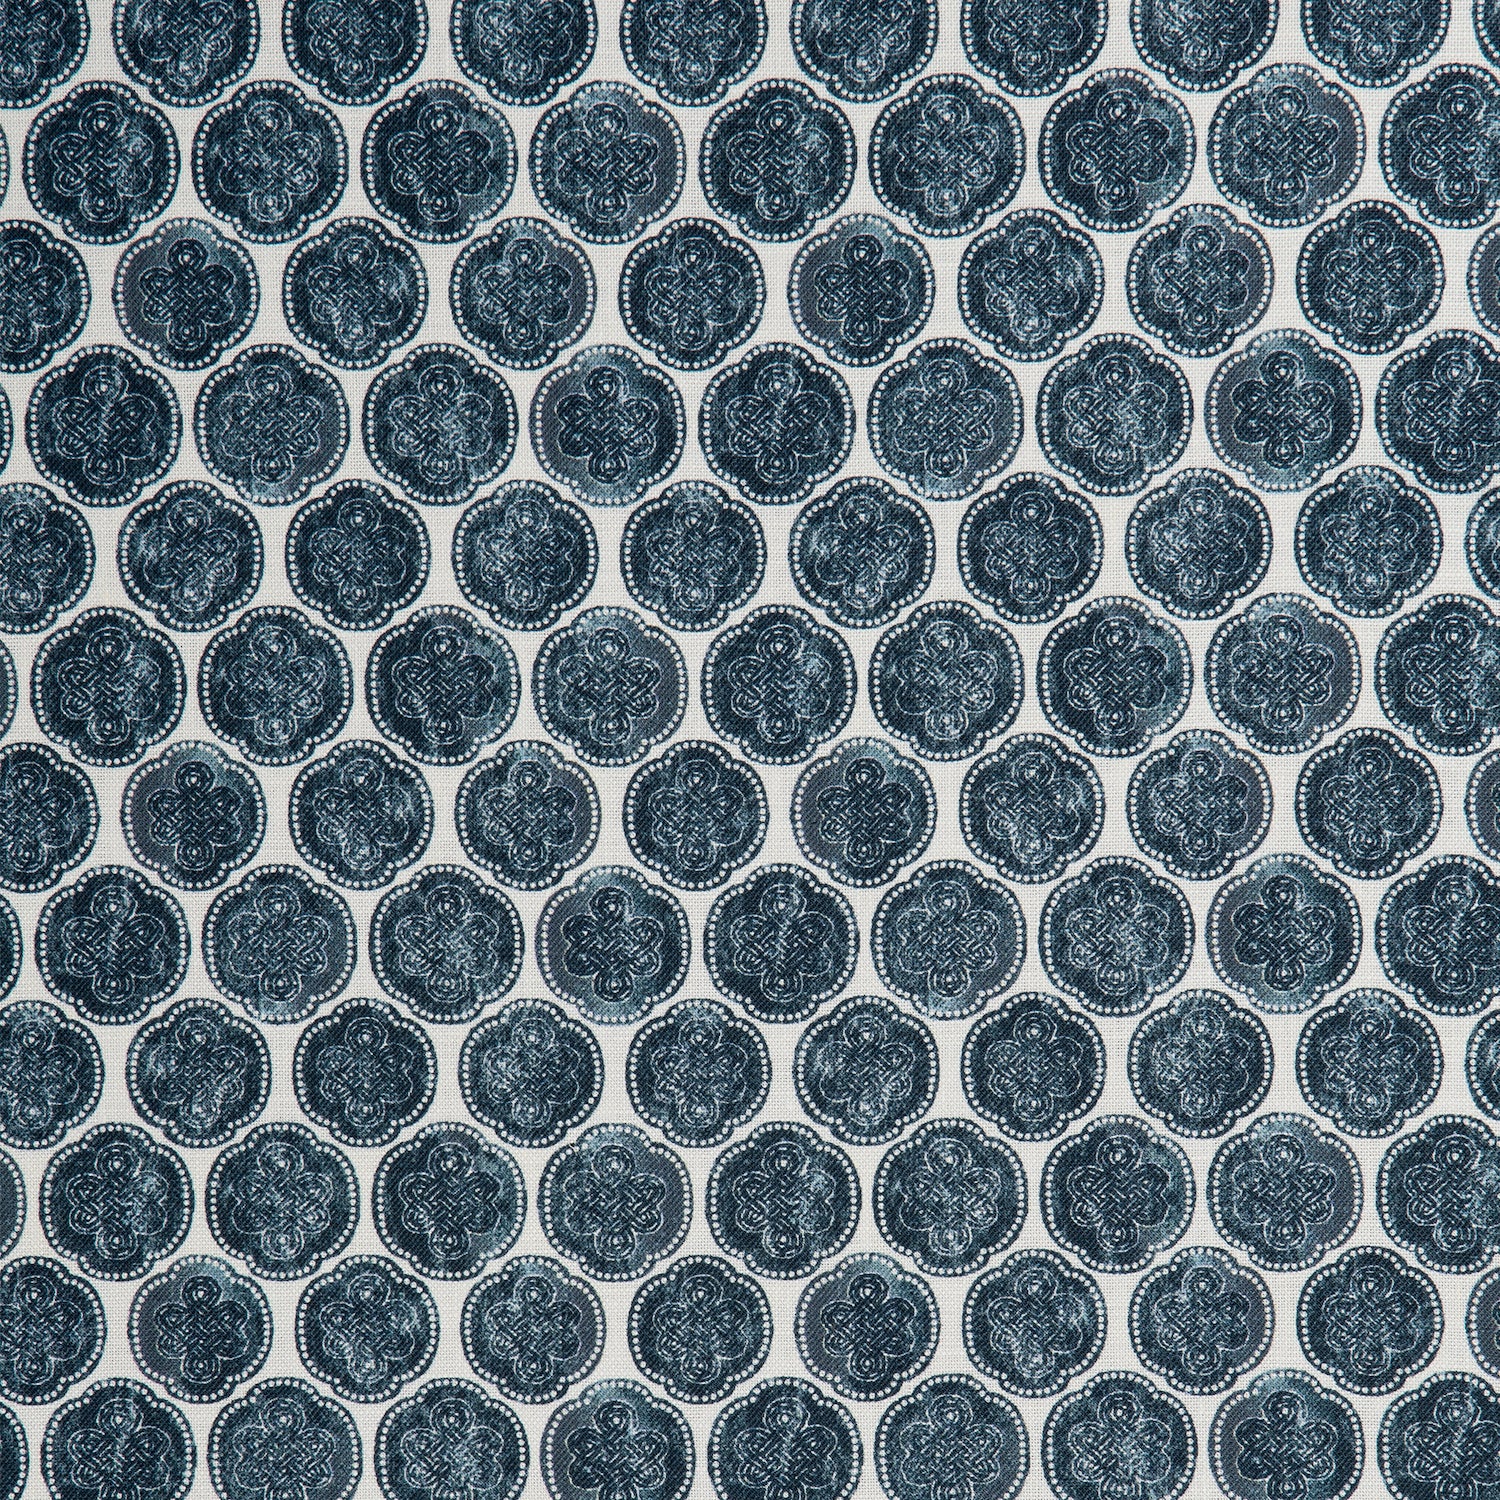 Detail of a printed linen fabric in a repeating knotted pattern in indigo on a white field.